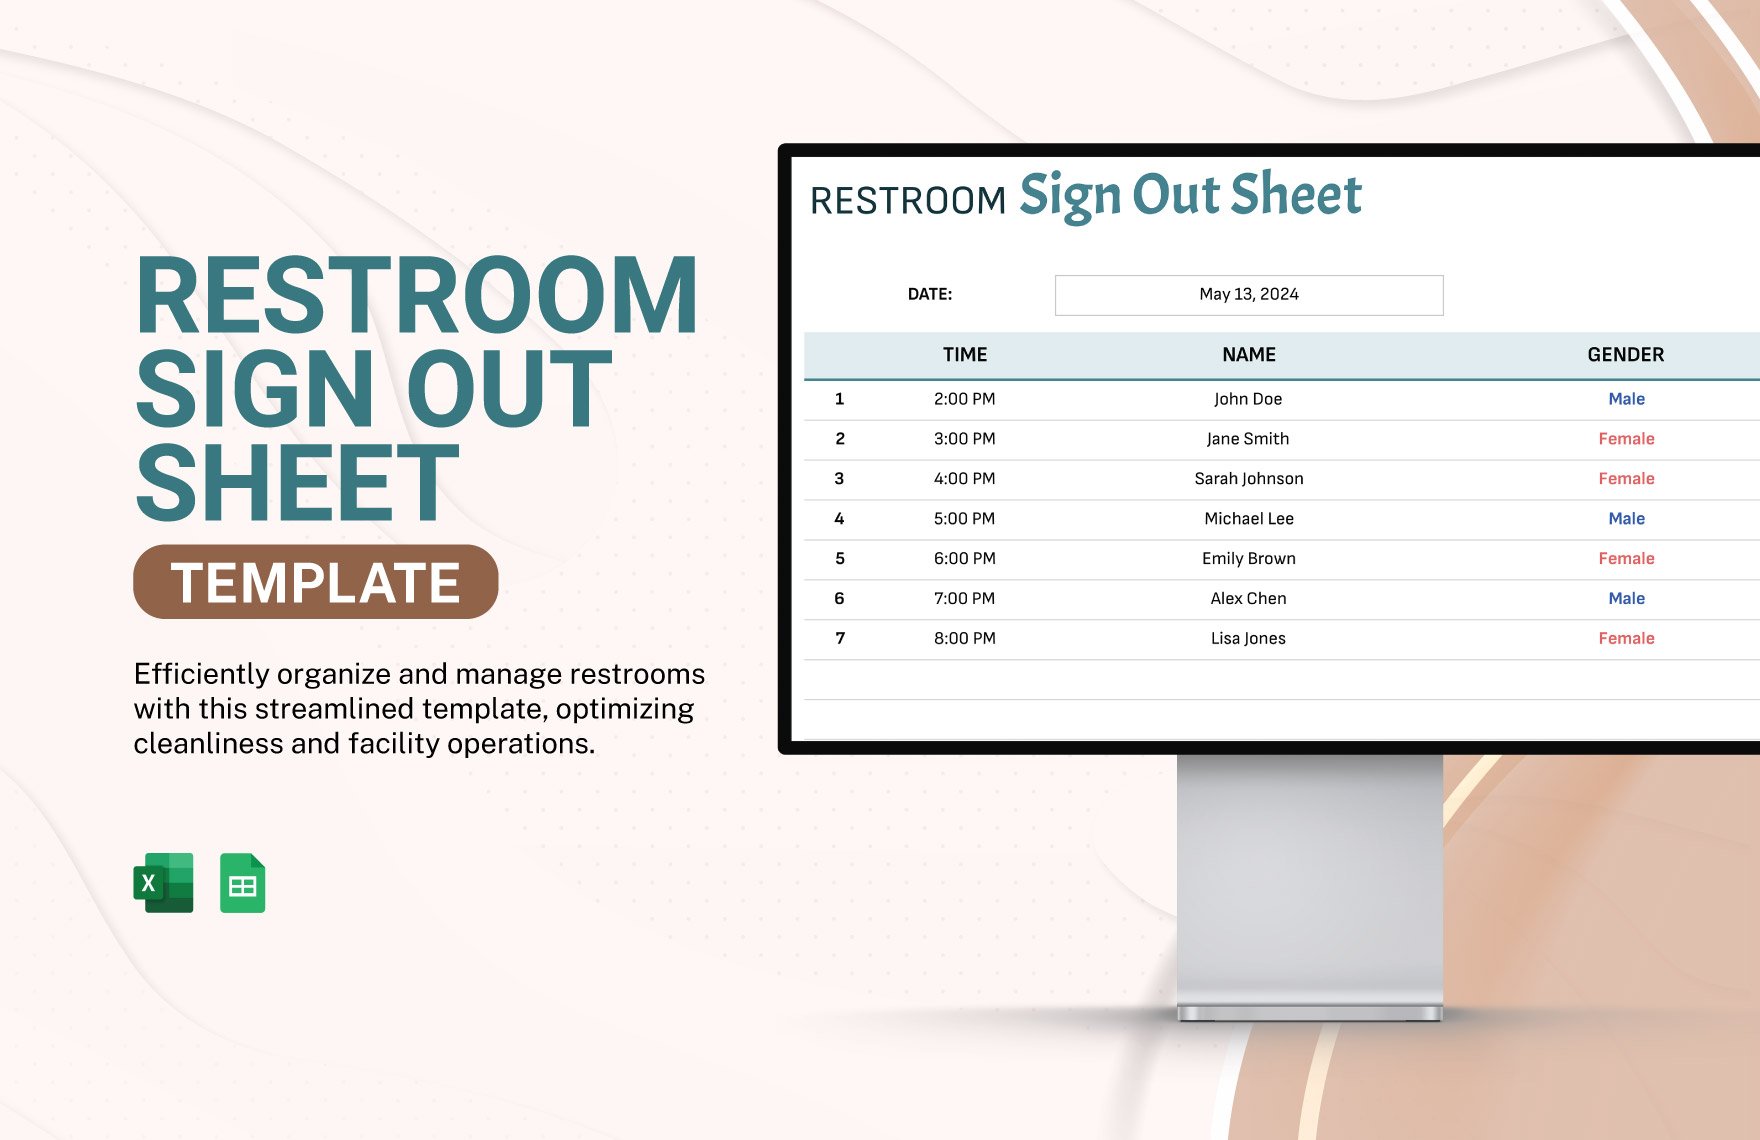 Free Restroom Sign Out Sheet Template in Excel, Google Sheets